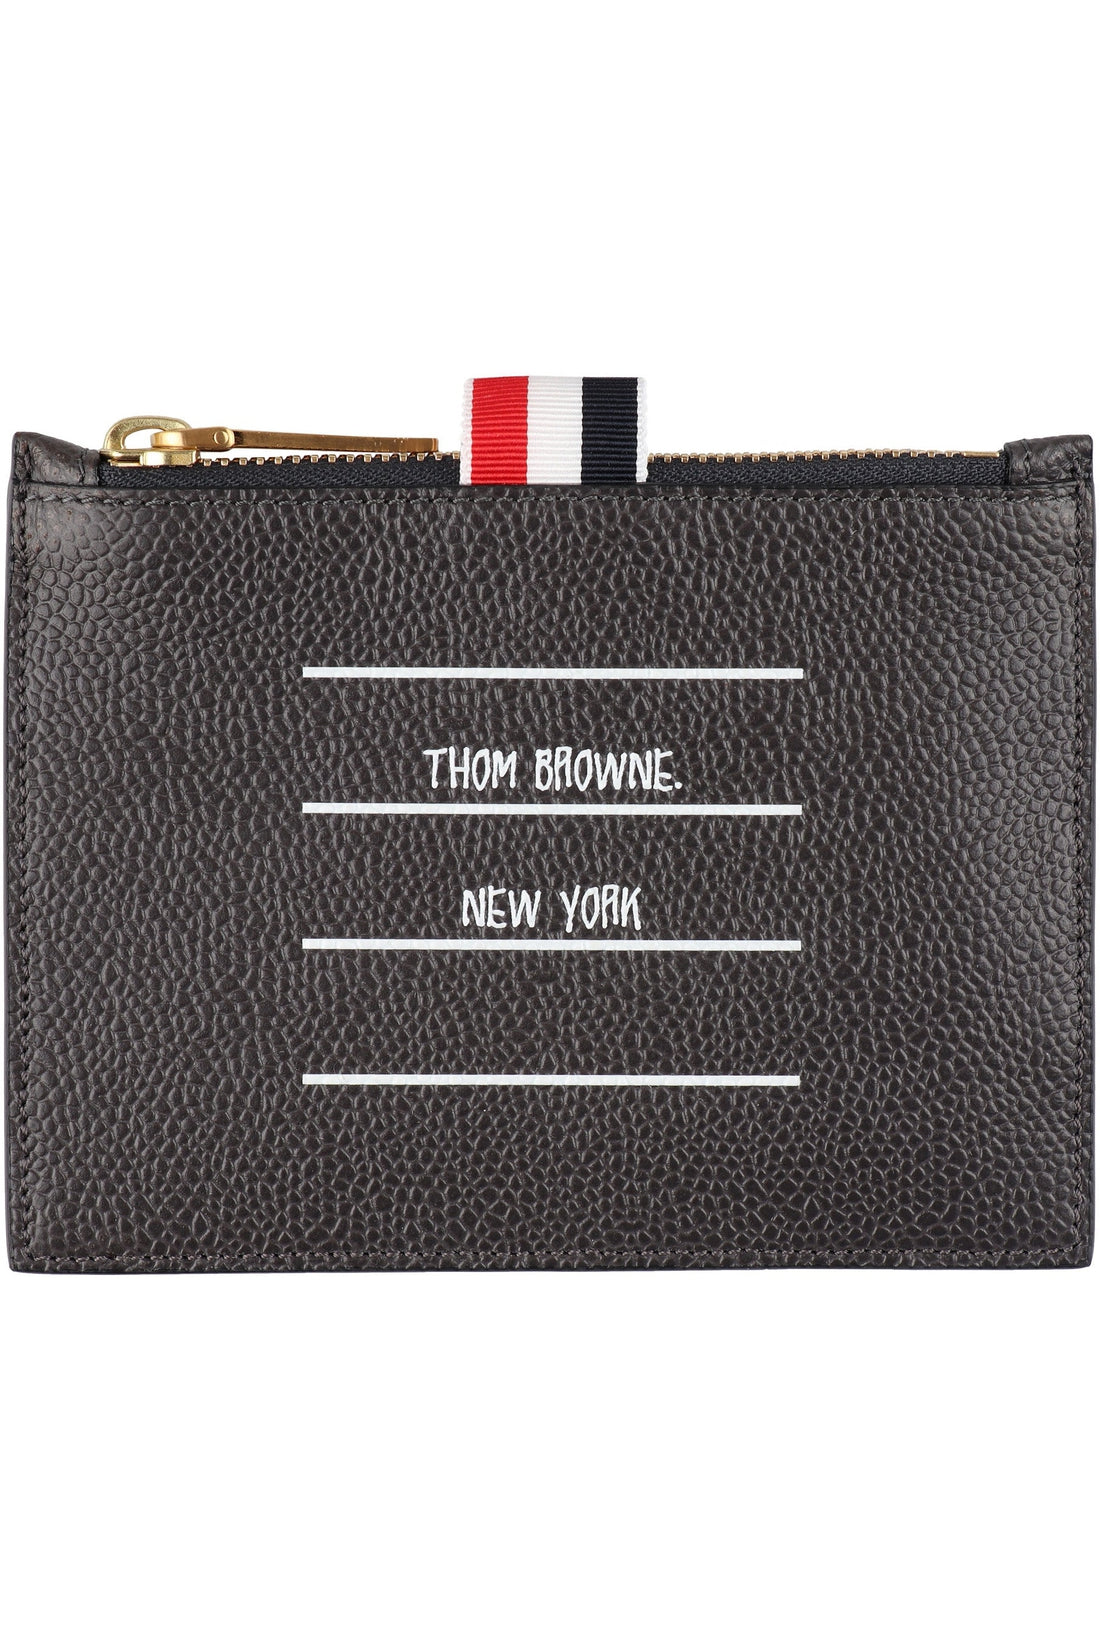 Thom Browne-OUTLET-SALE-Leather coin purse-ARCHIVIST